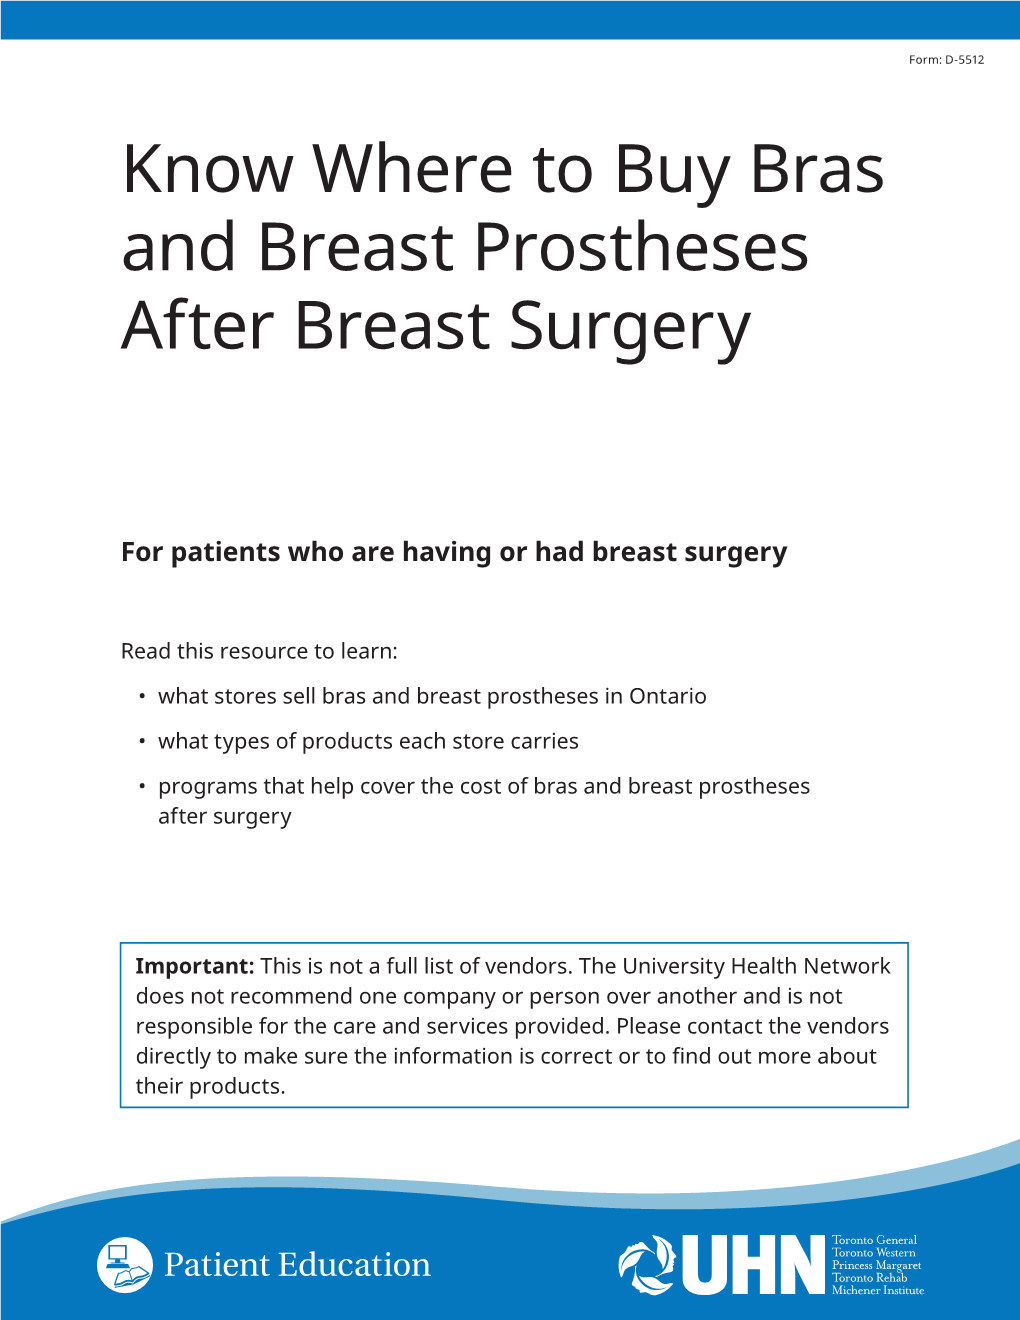 Know Where to Buy Bras and Breast Prostheses After Breast Surgery